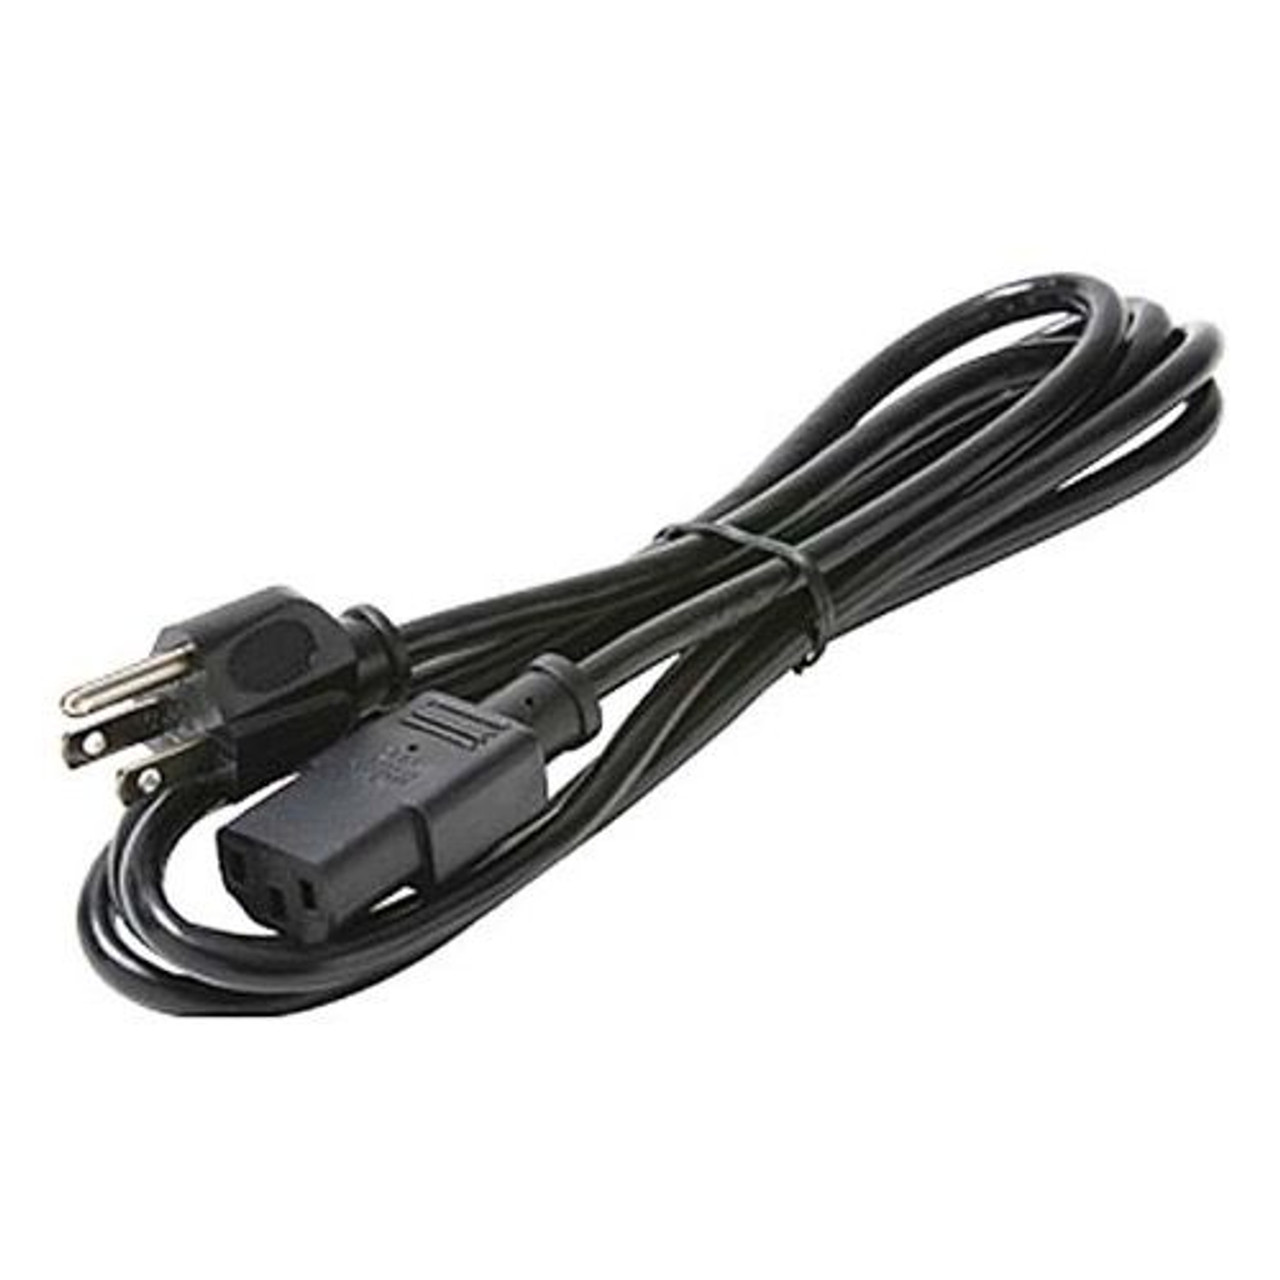 Eagle 6' FT Computer AC Power Cord Cable 3 Prong Polarized 120 VAC 18 AWG 3 Conductor UL Listed Black Jacket 1875 Watt Double Insulated Grounded Female Plug Replacement Cable Standard, Part # PWR-1000-06